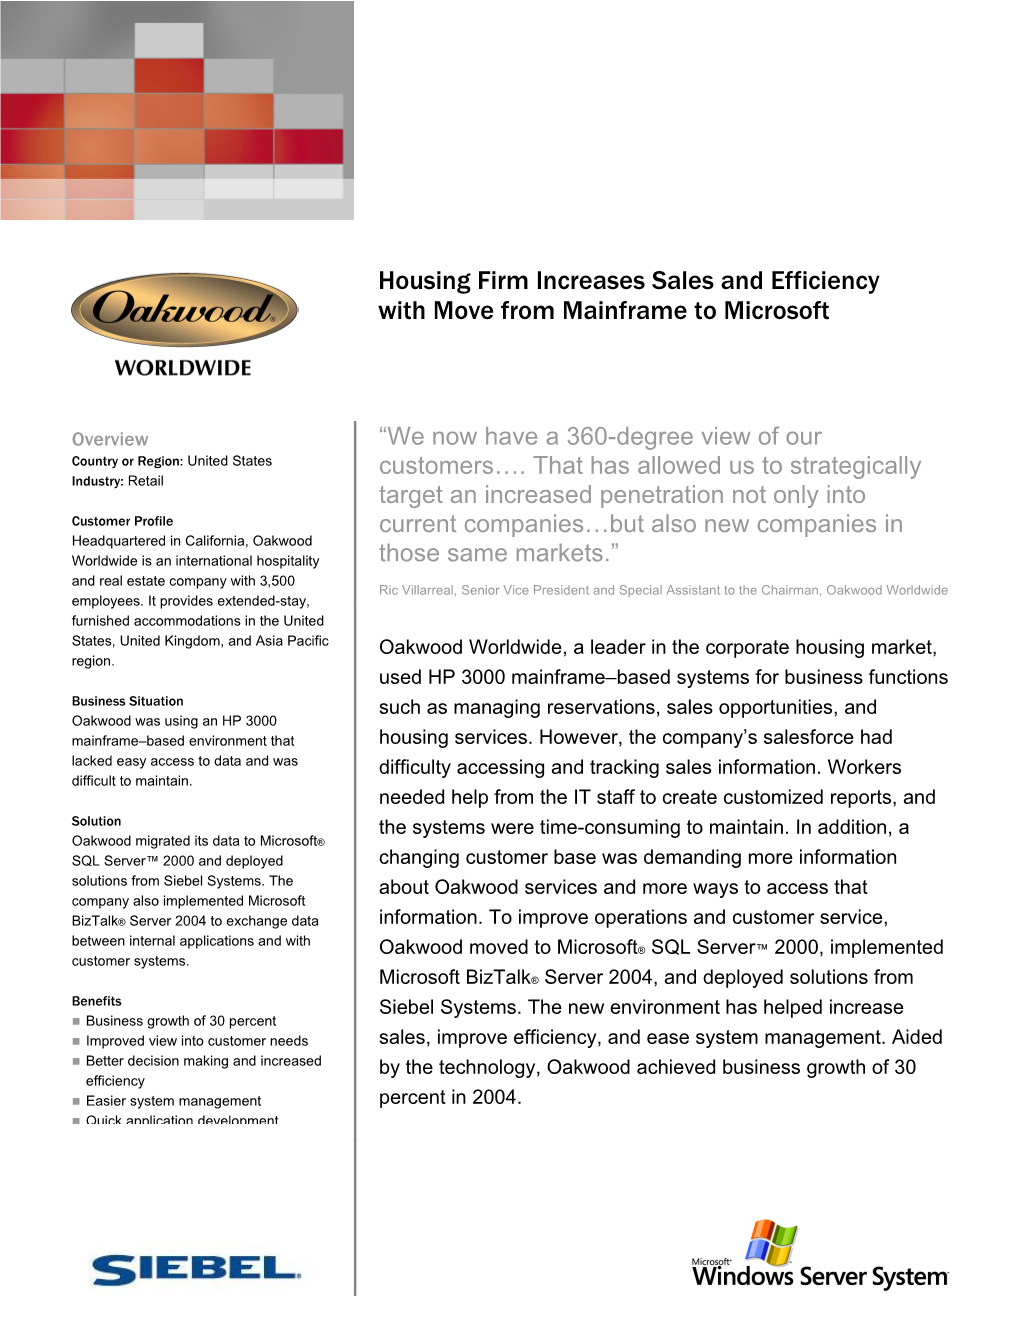 Housing Firm Increases Sales and Efficiency with Move from Mainframe to Microsoft